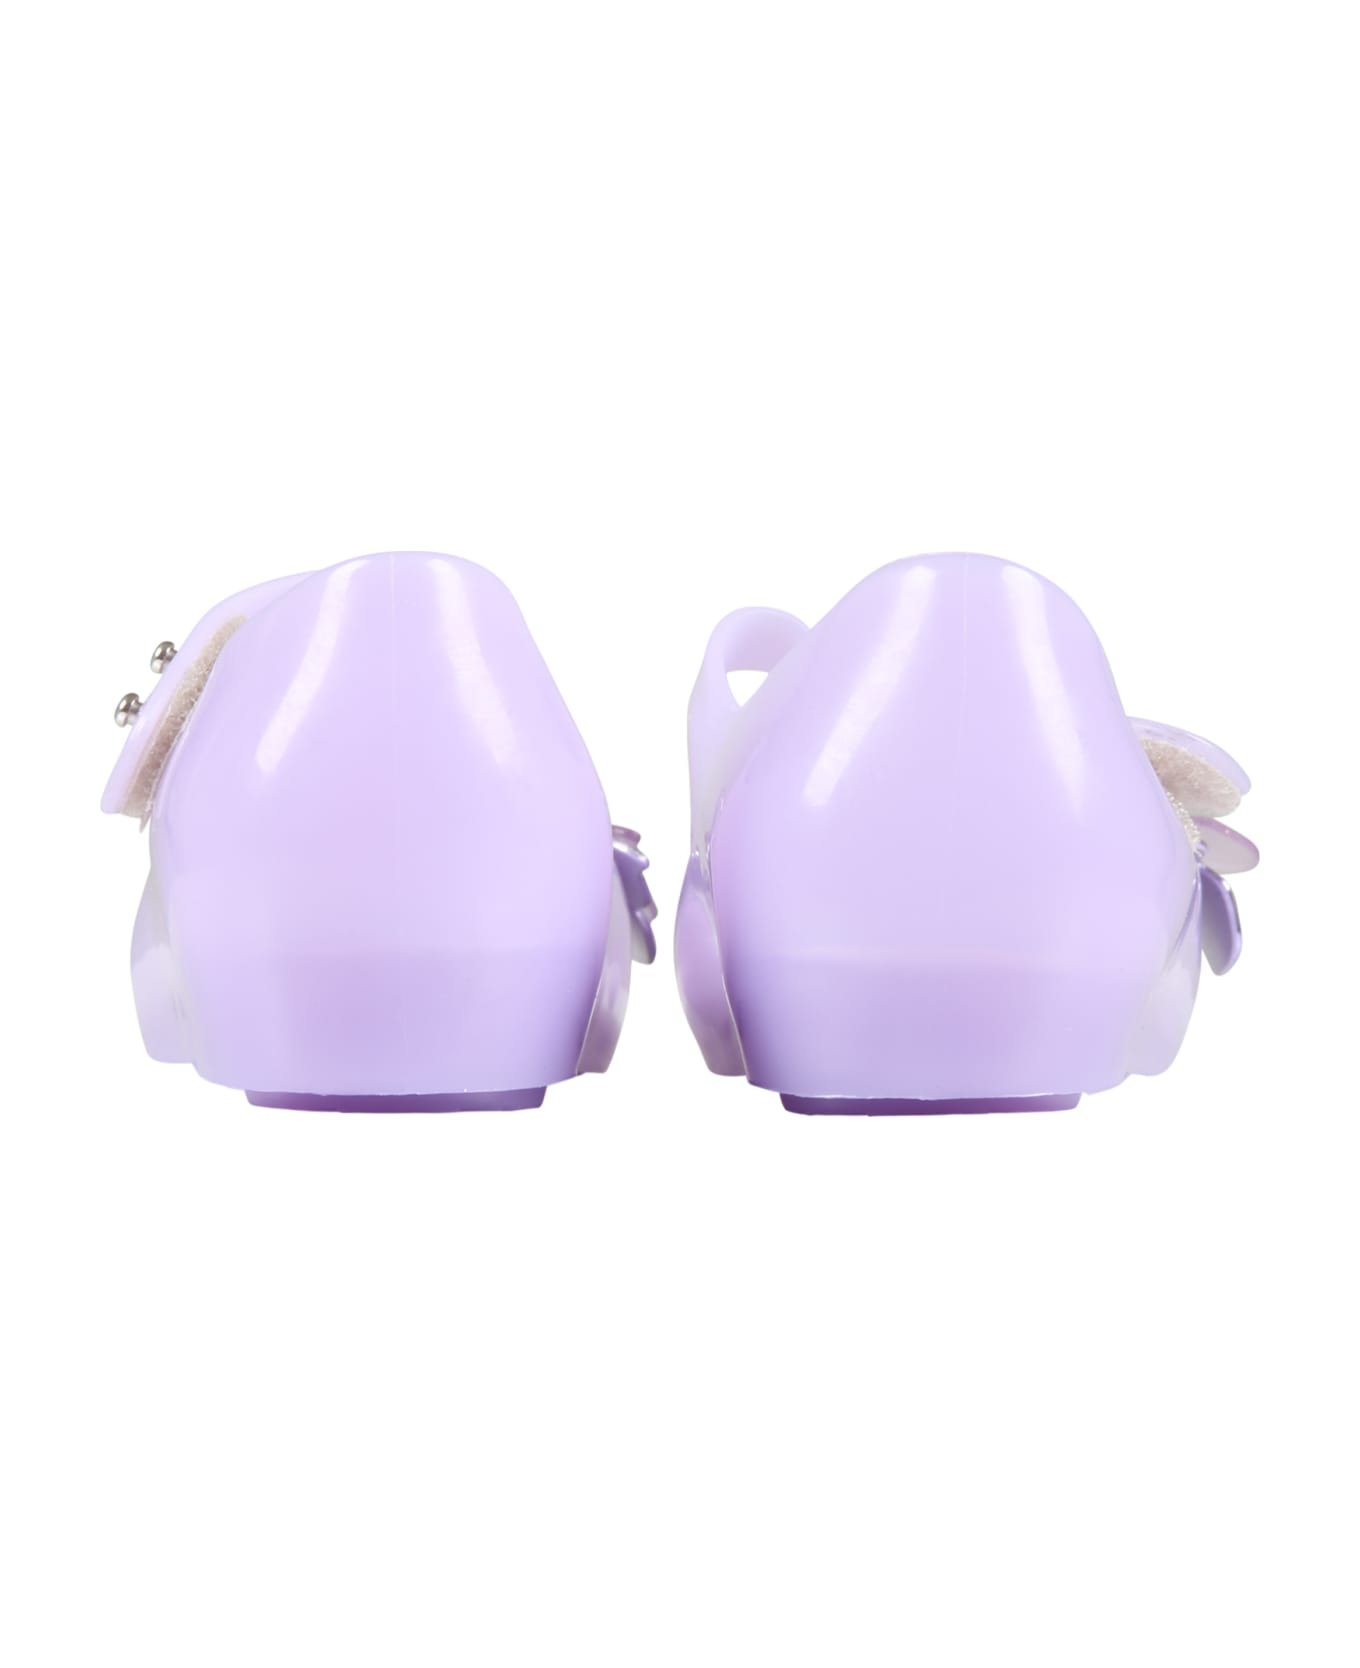 Melissa Lilac Ballerinas For Girl With Butterflies - Violet シューズ